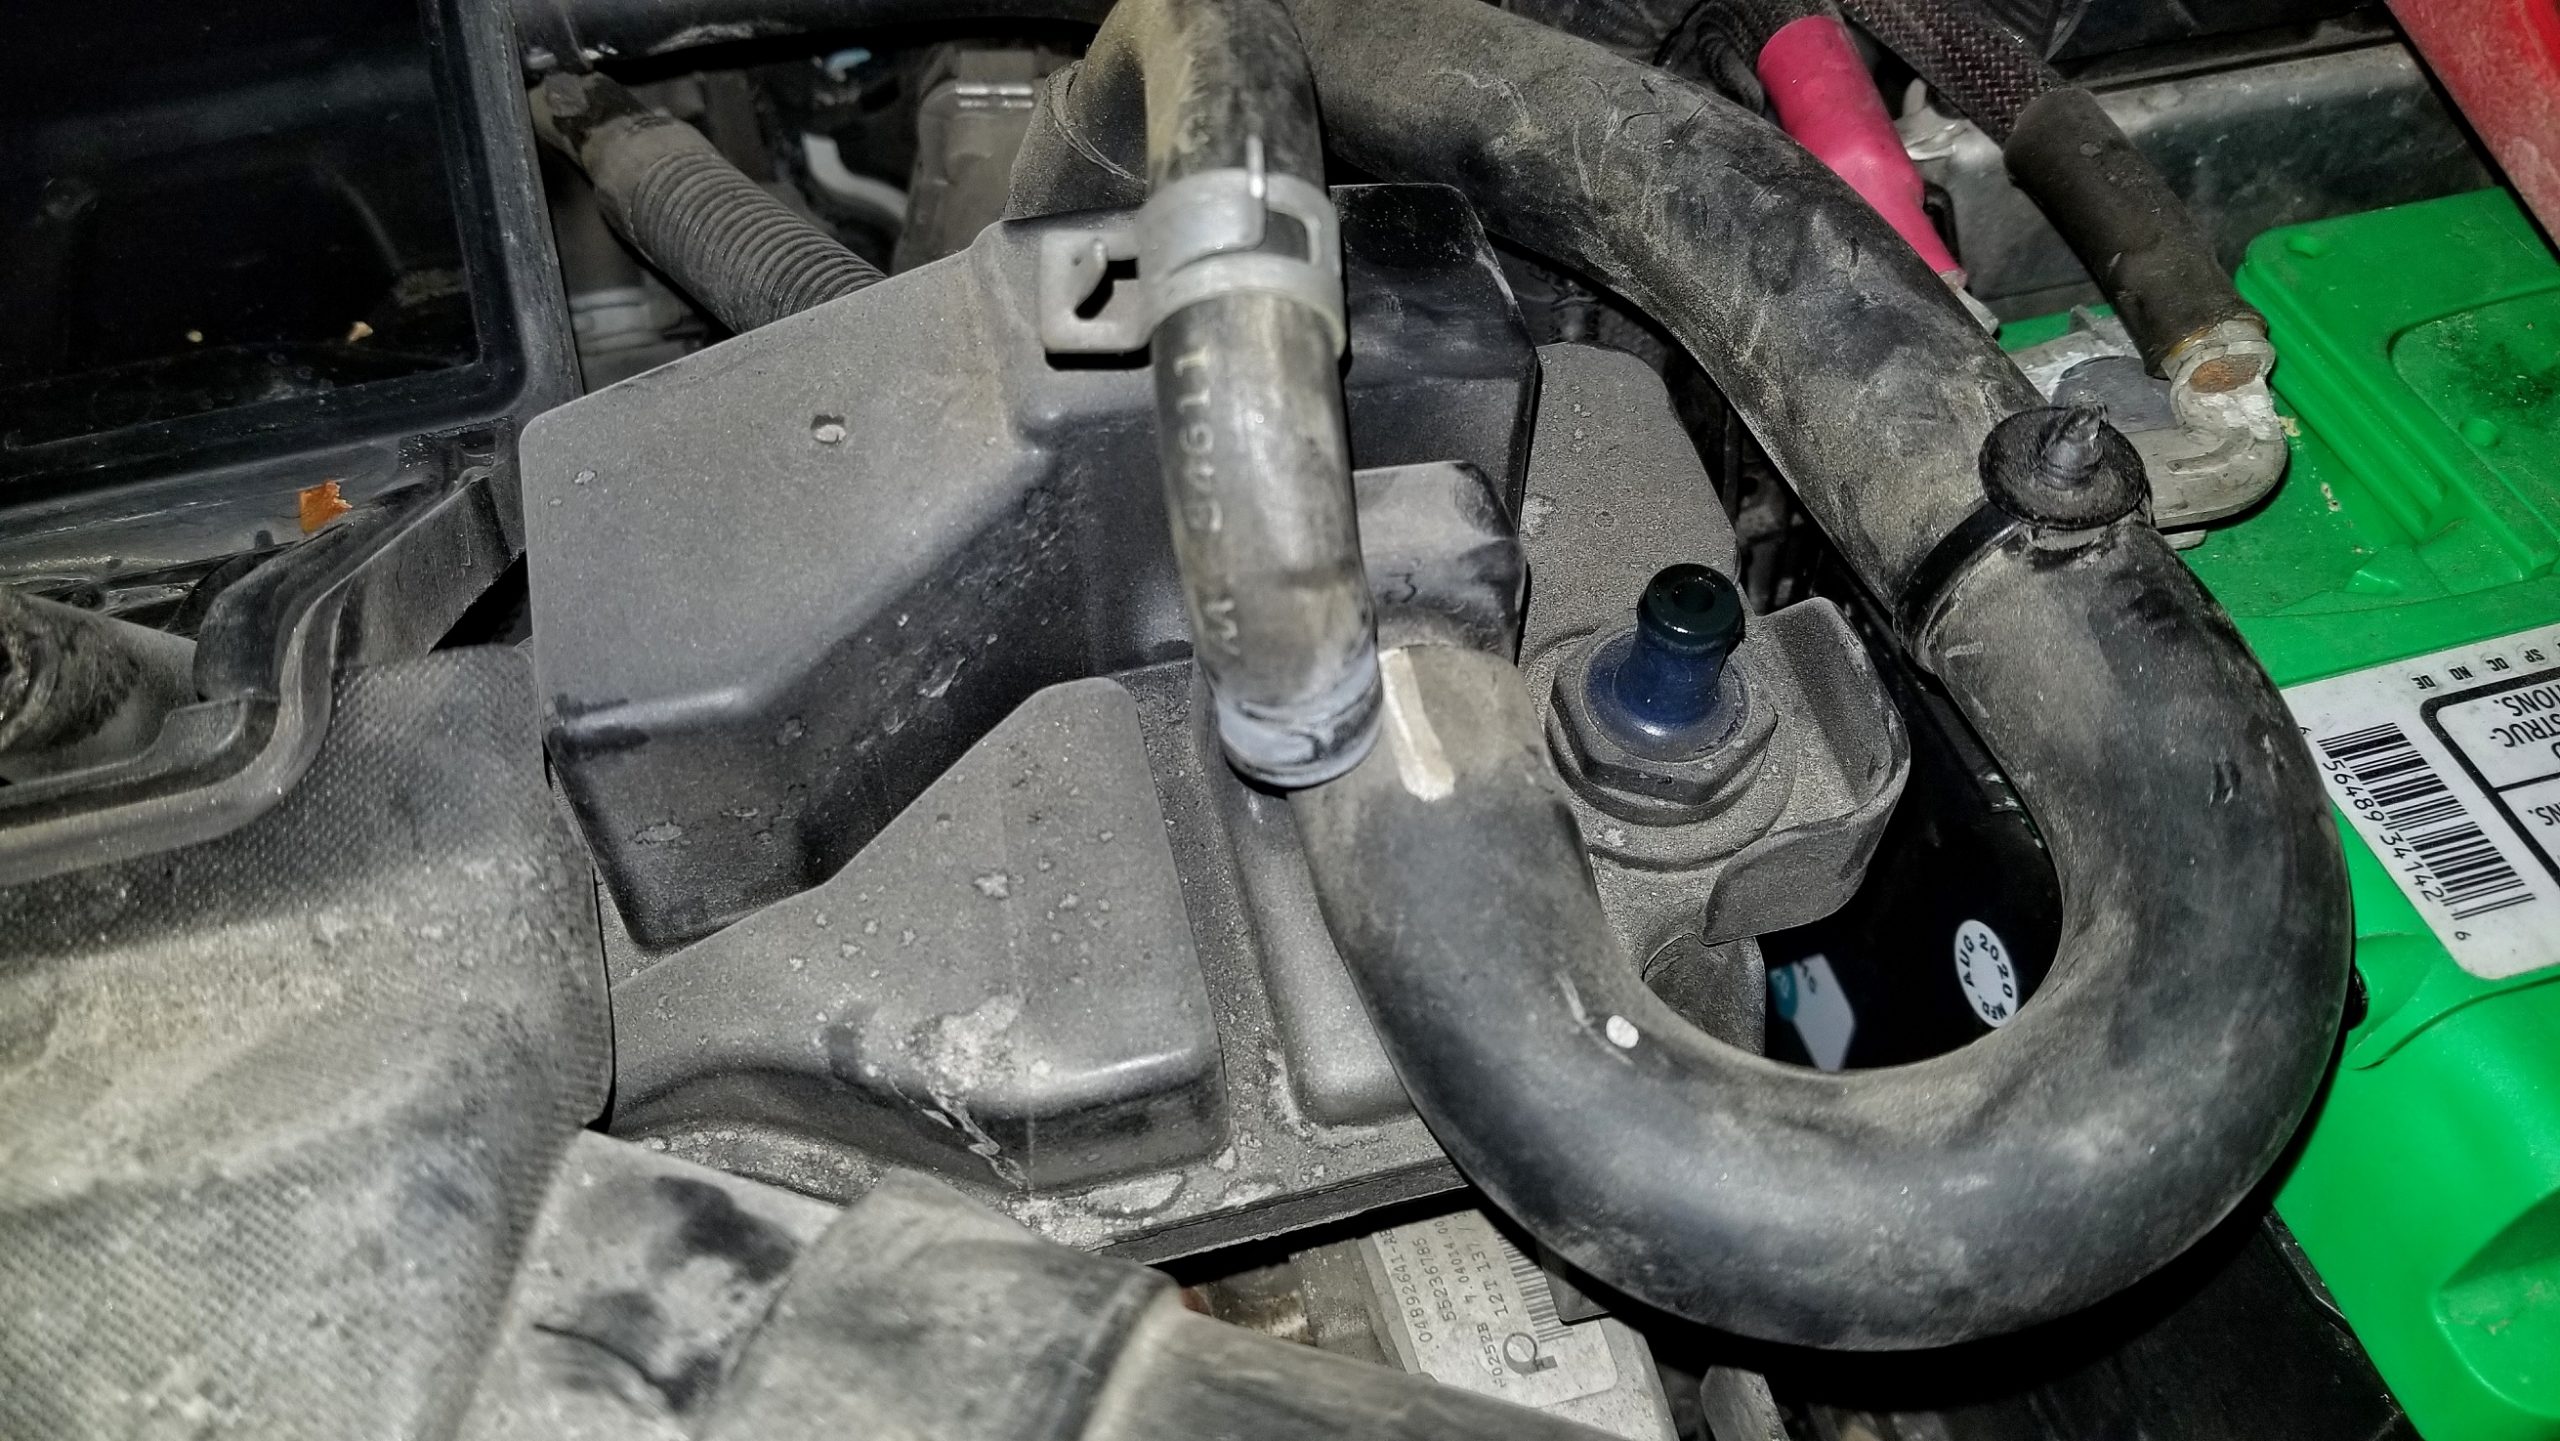 The oil separator and PCV valve in a 2013 Fiat 500 Abarth